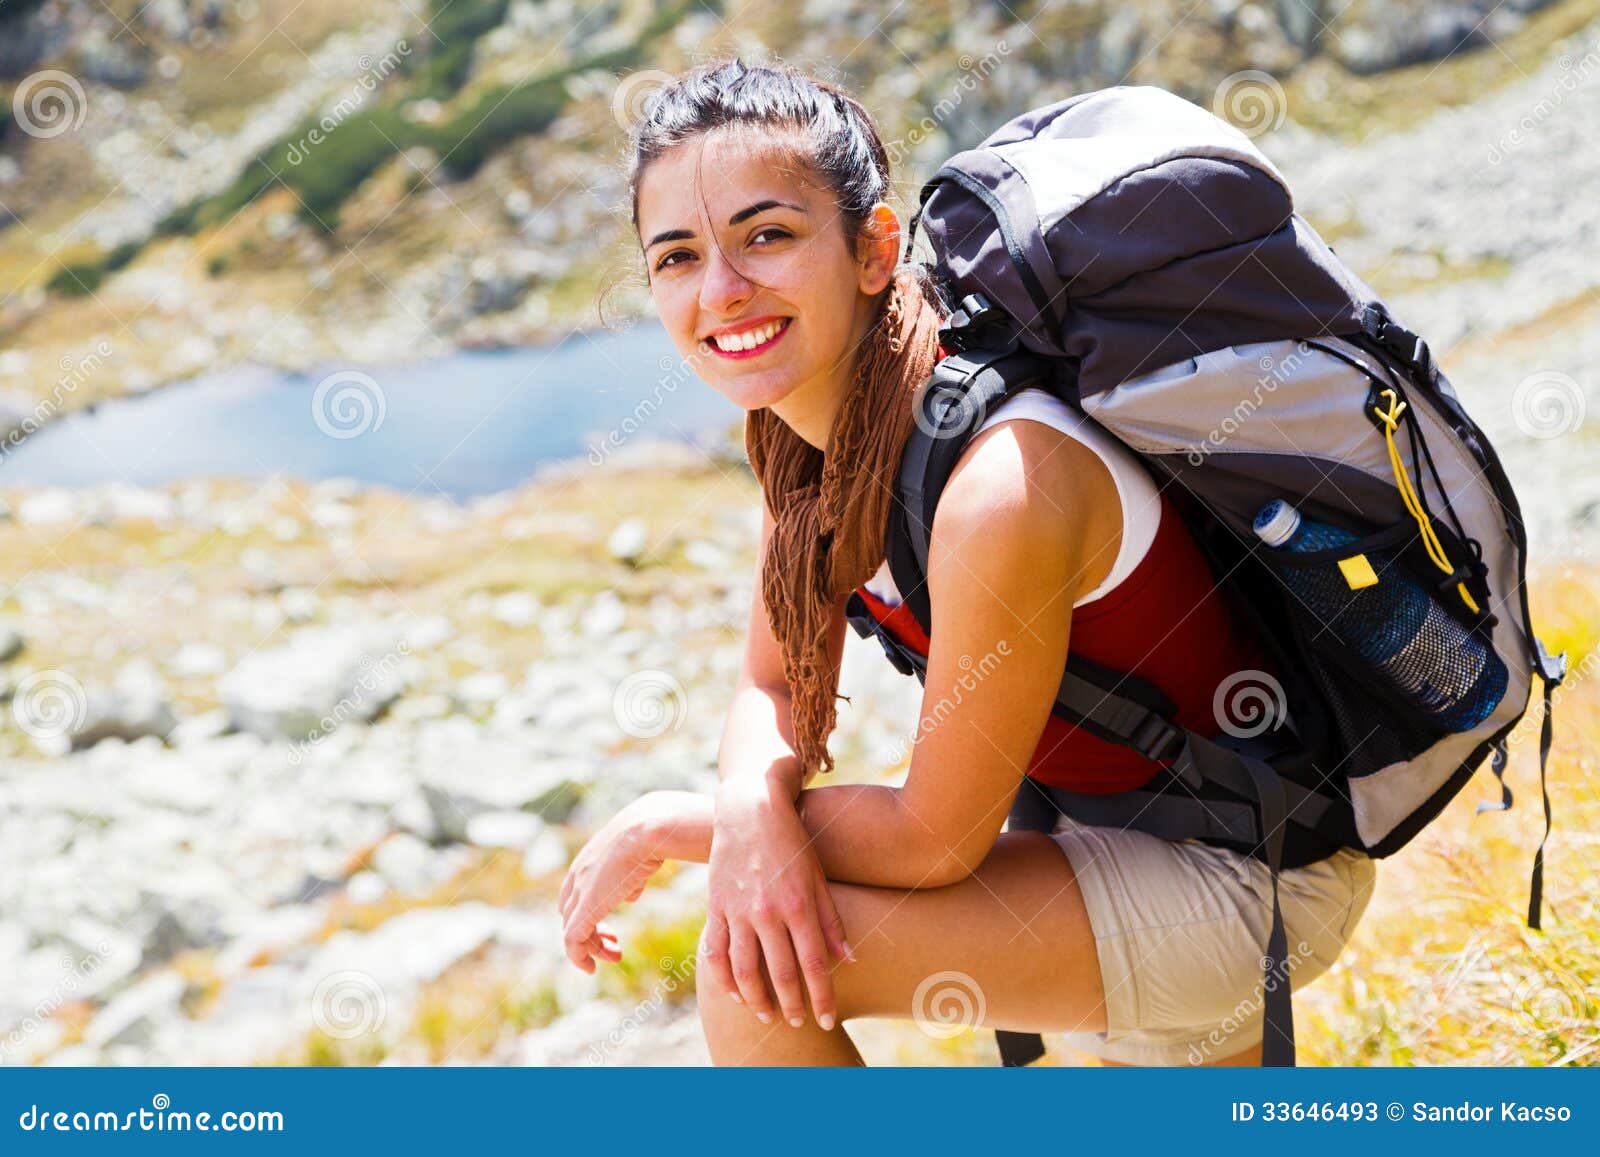 Join Me for a Memorable Journey Stock Image - Image of mountaineering ...